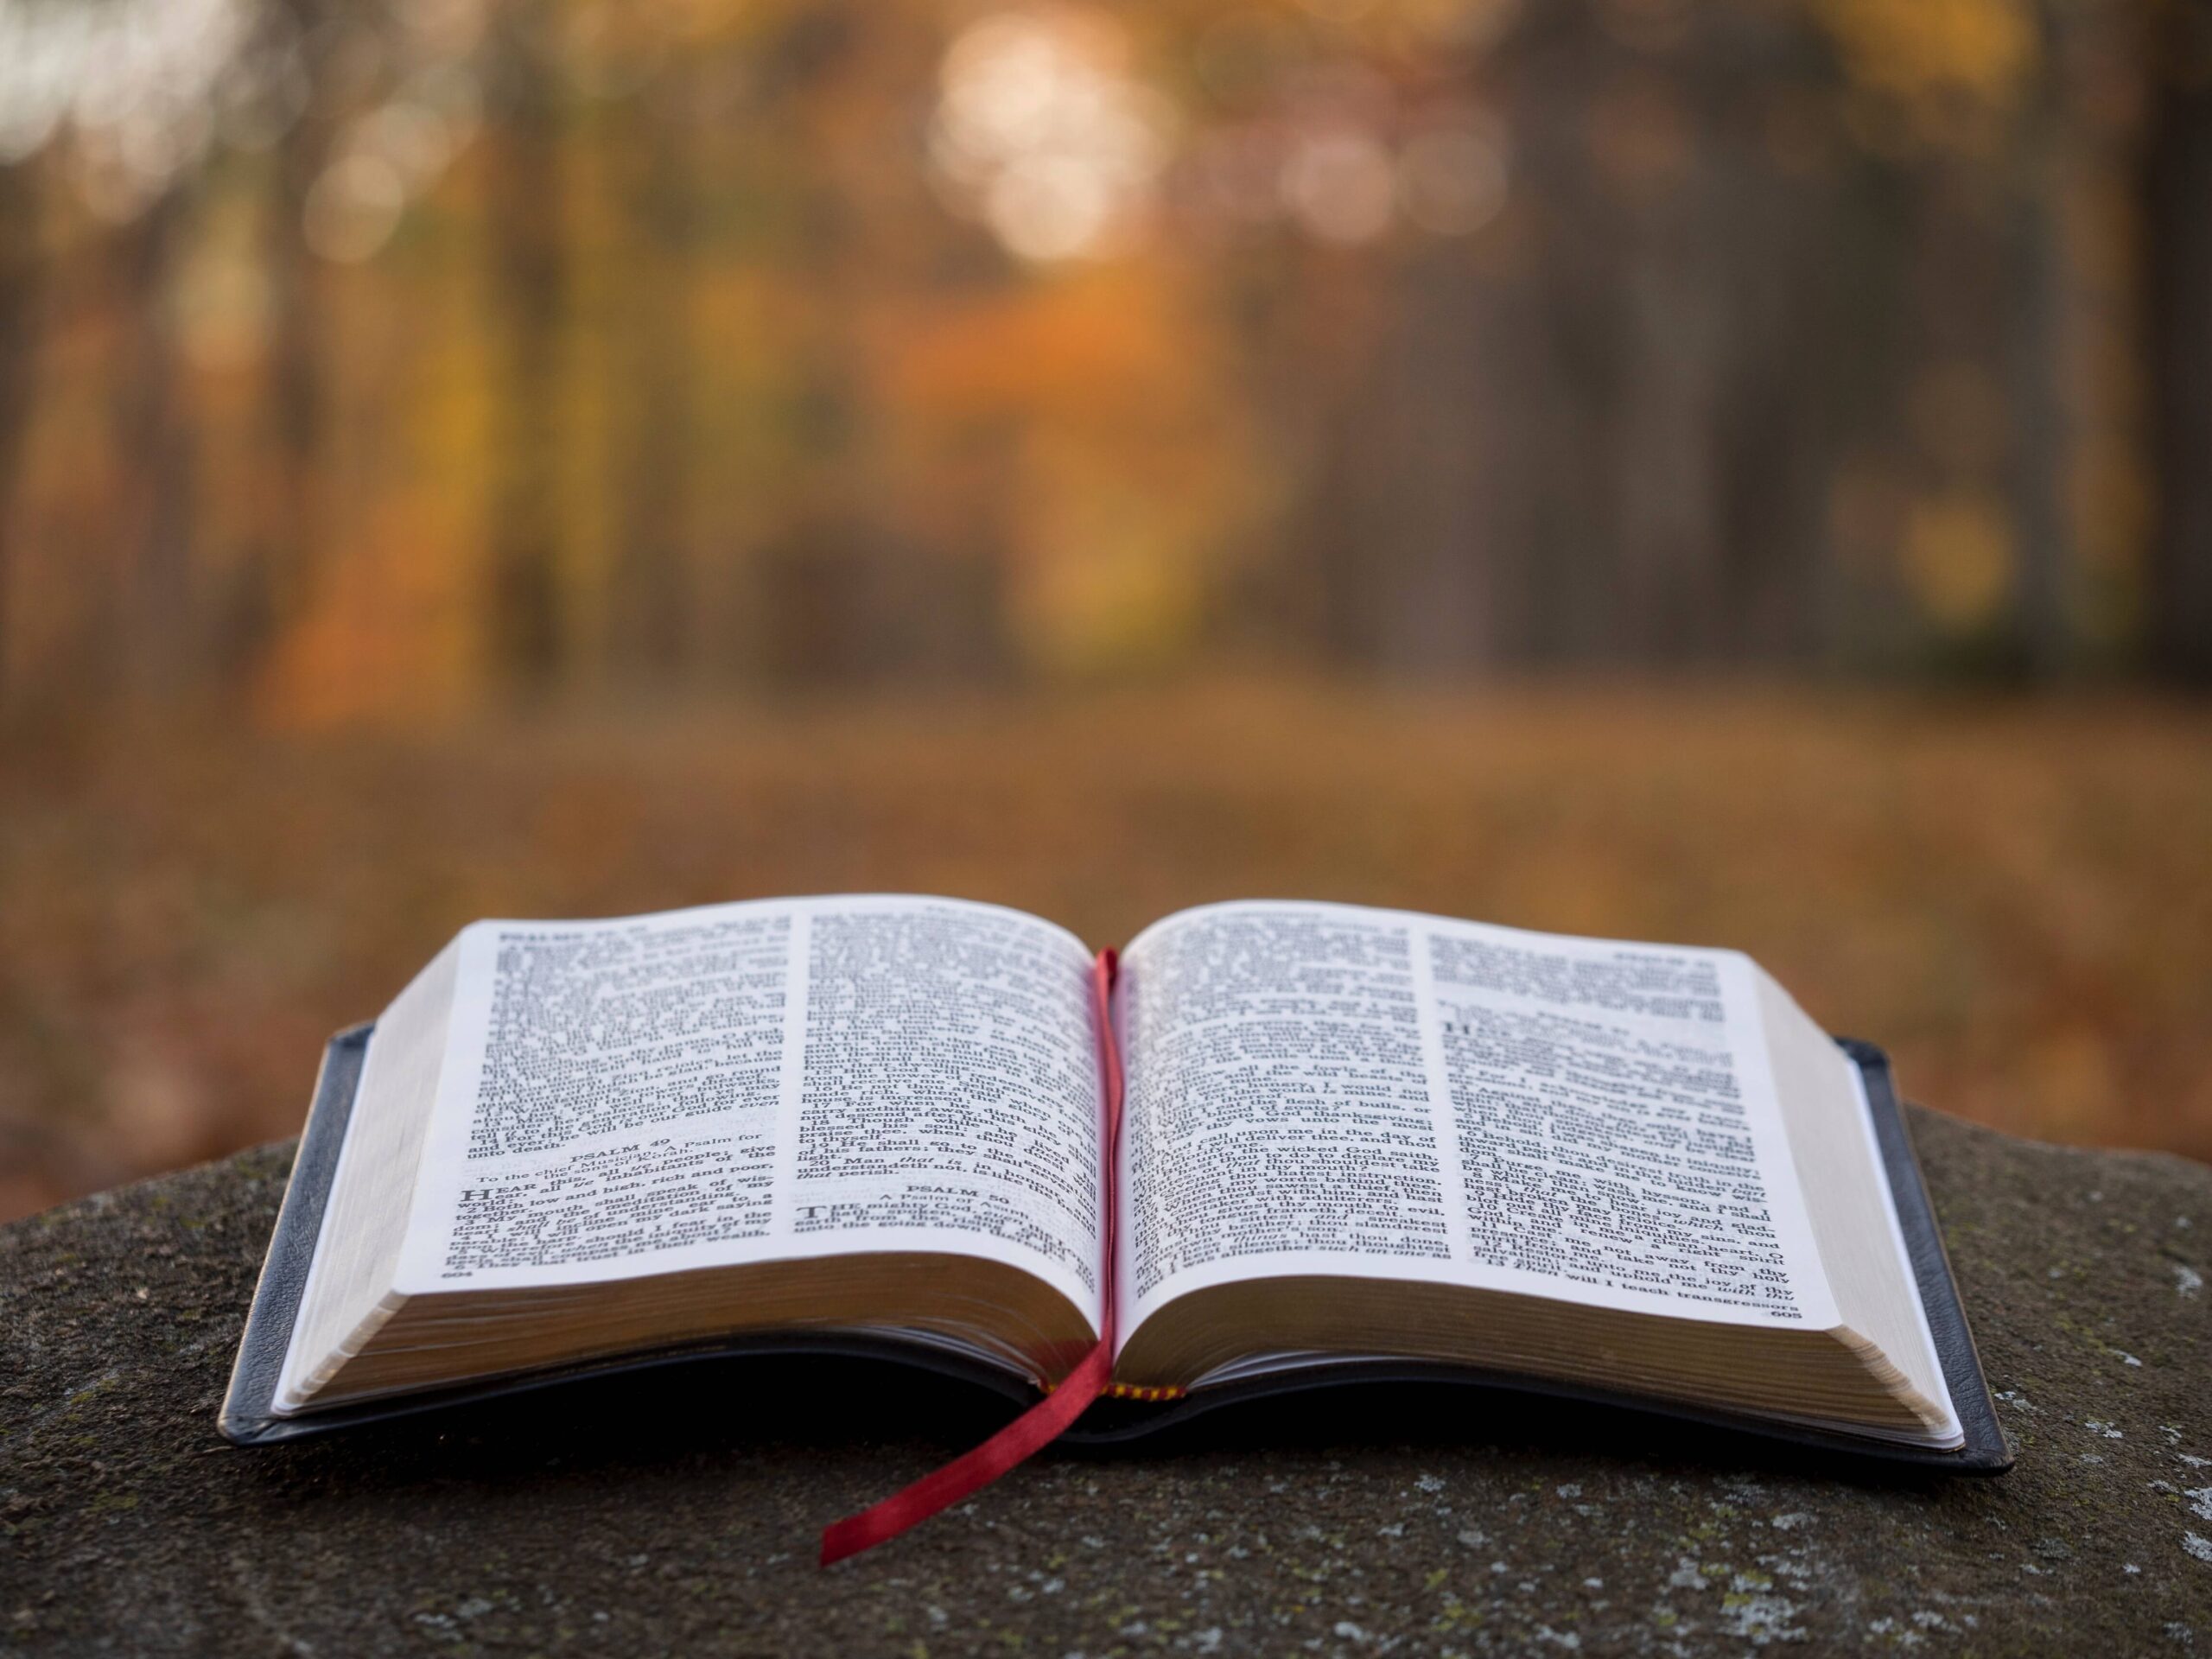 An open bible lays on the ground. Christian counseling in Raleigh NC can help you through your struggle and build your faith. We provide counseling that incorporates a biblical worldview and clinical techniques. Start working with a Christian counselor in Raleigh, NC today!